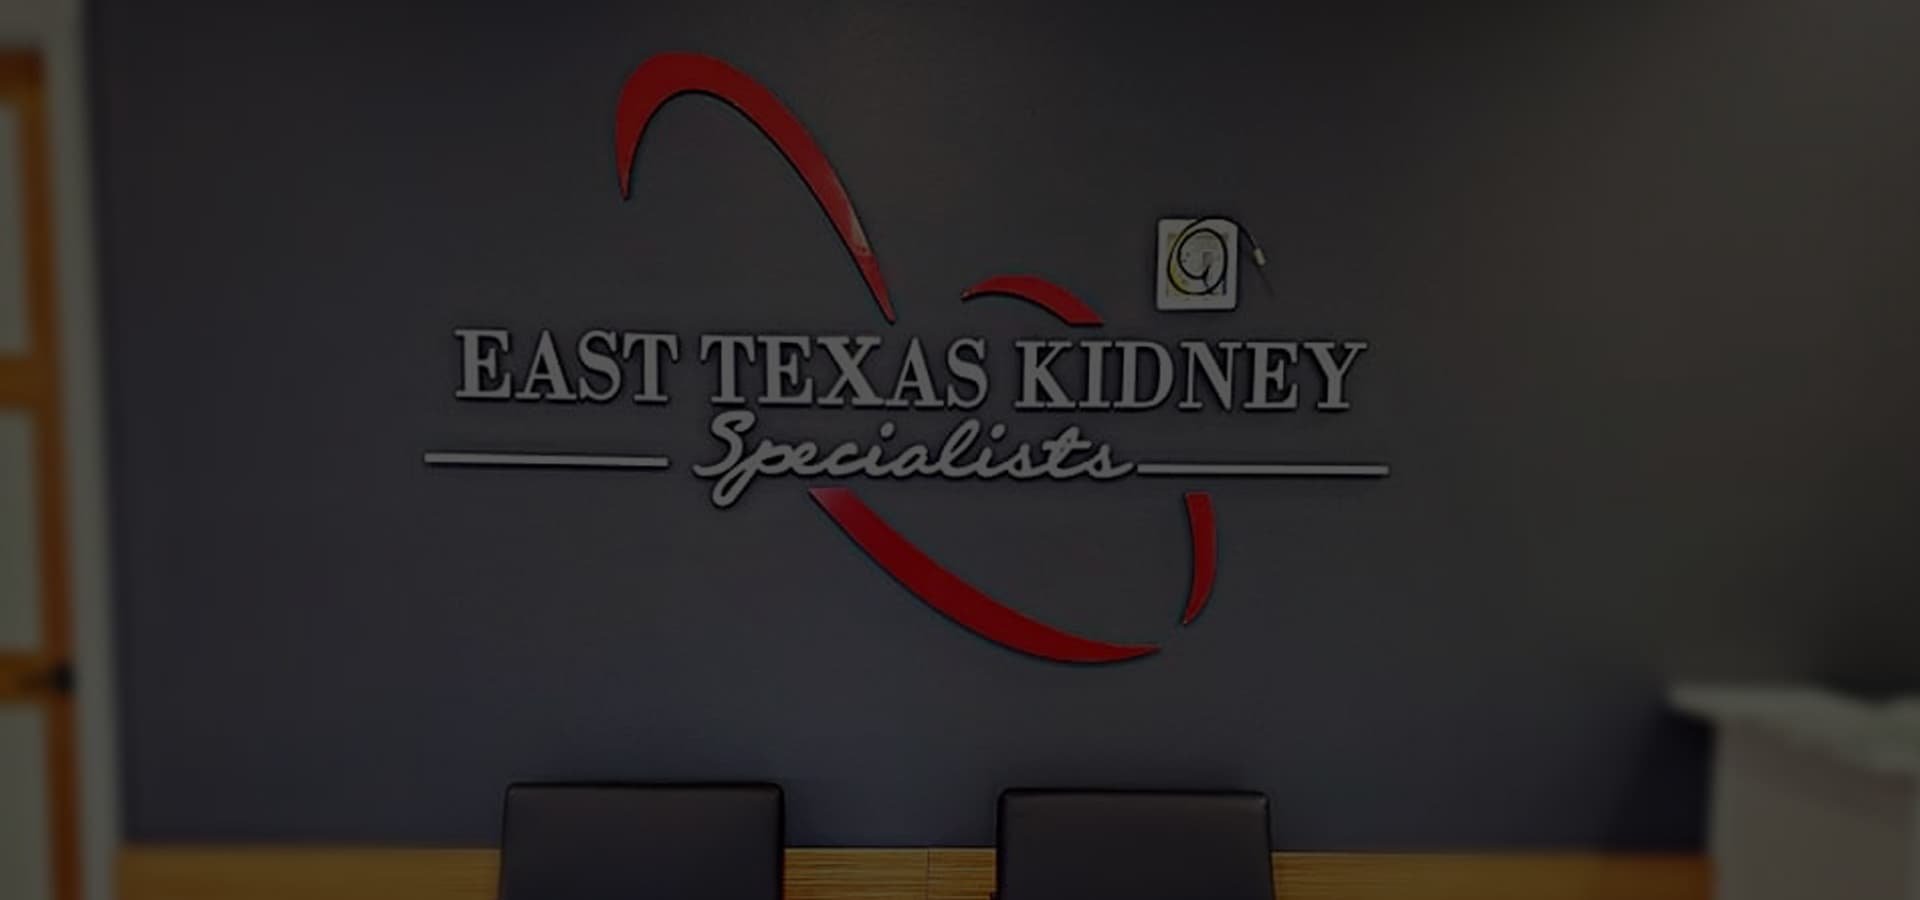 Wildts Wiring has worked with East Texas Kidney Specialists!